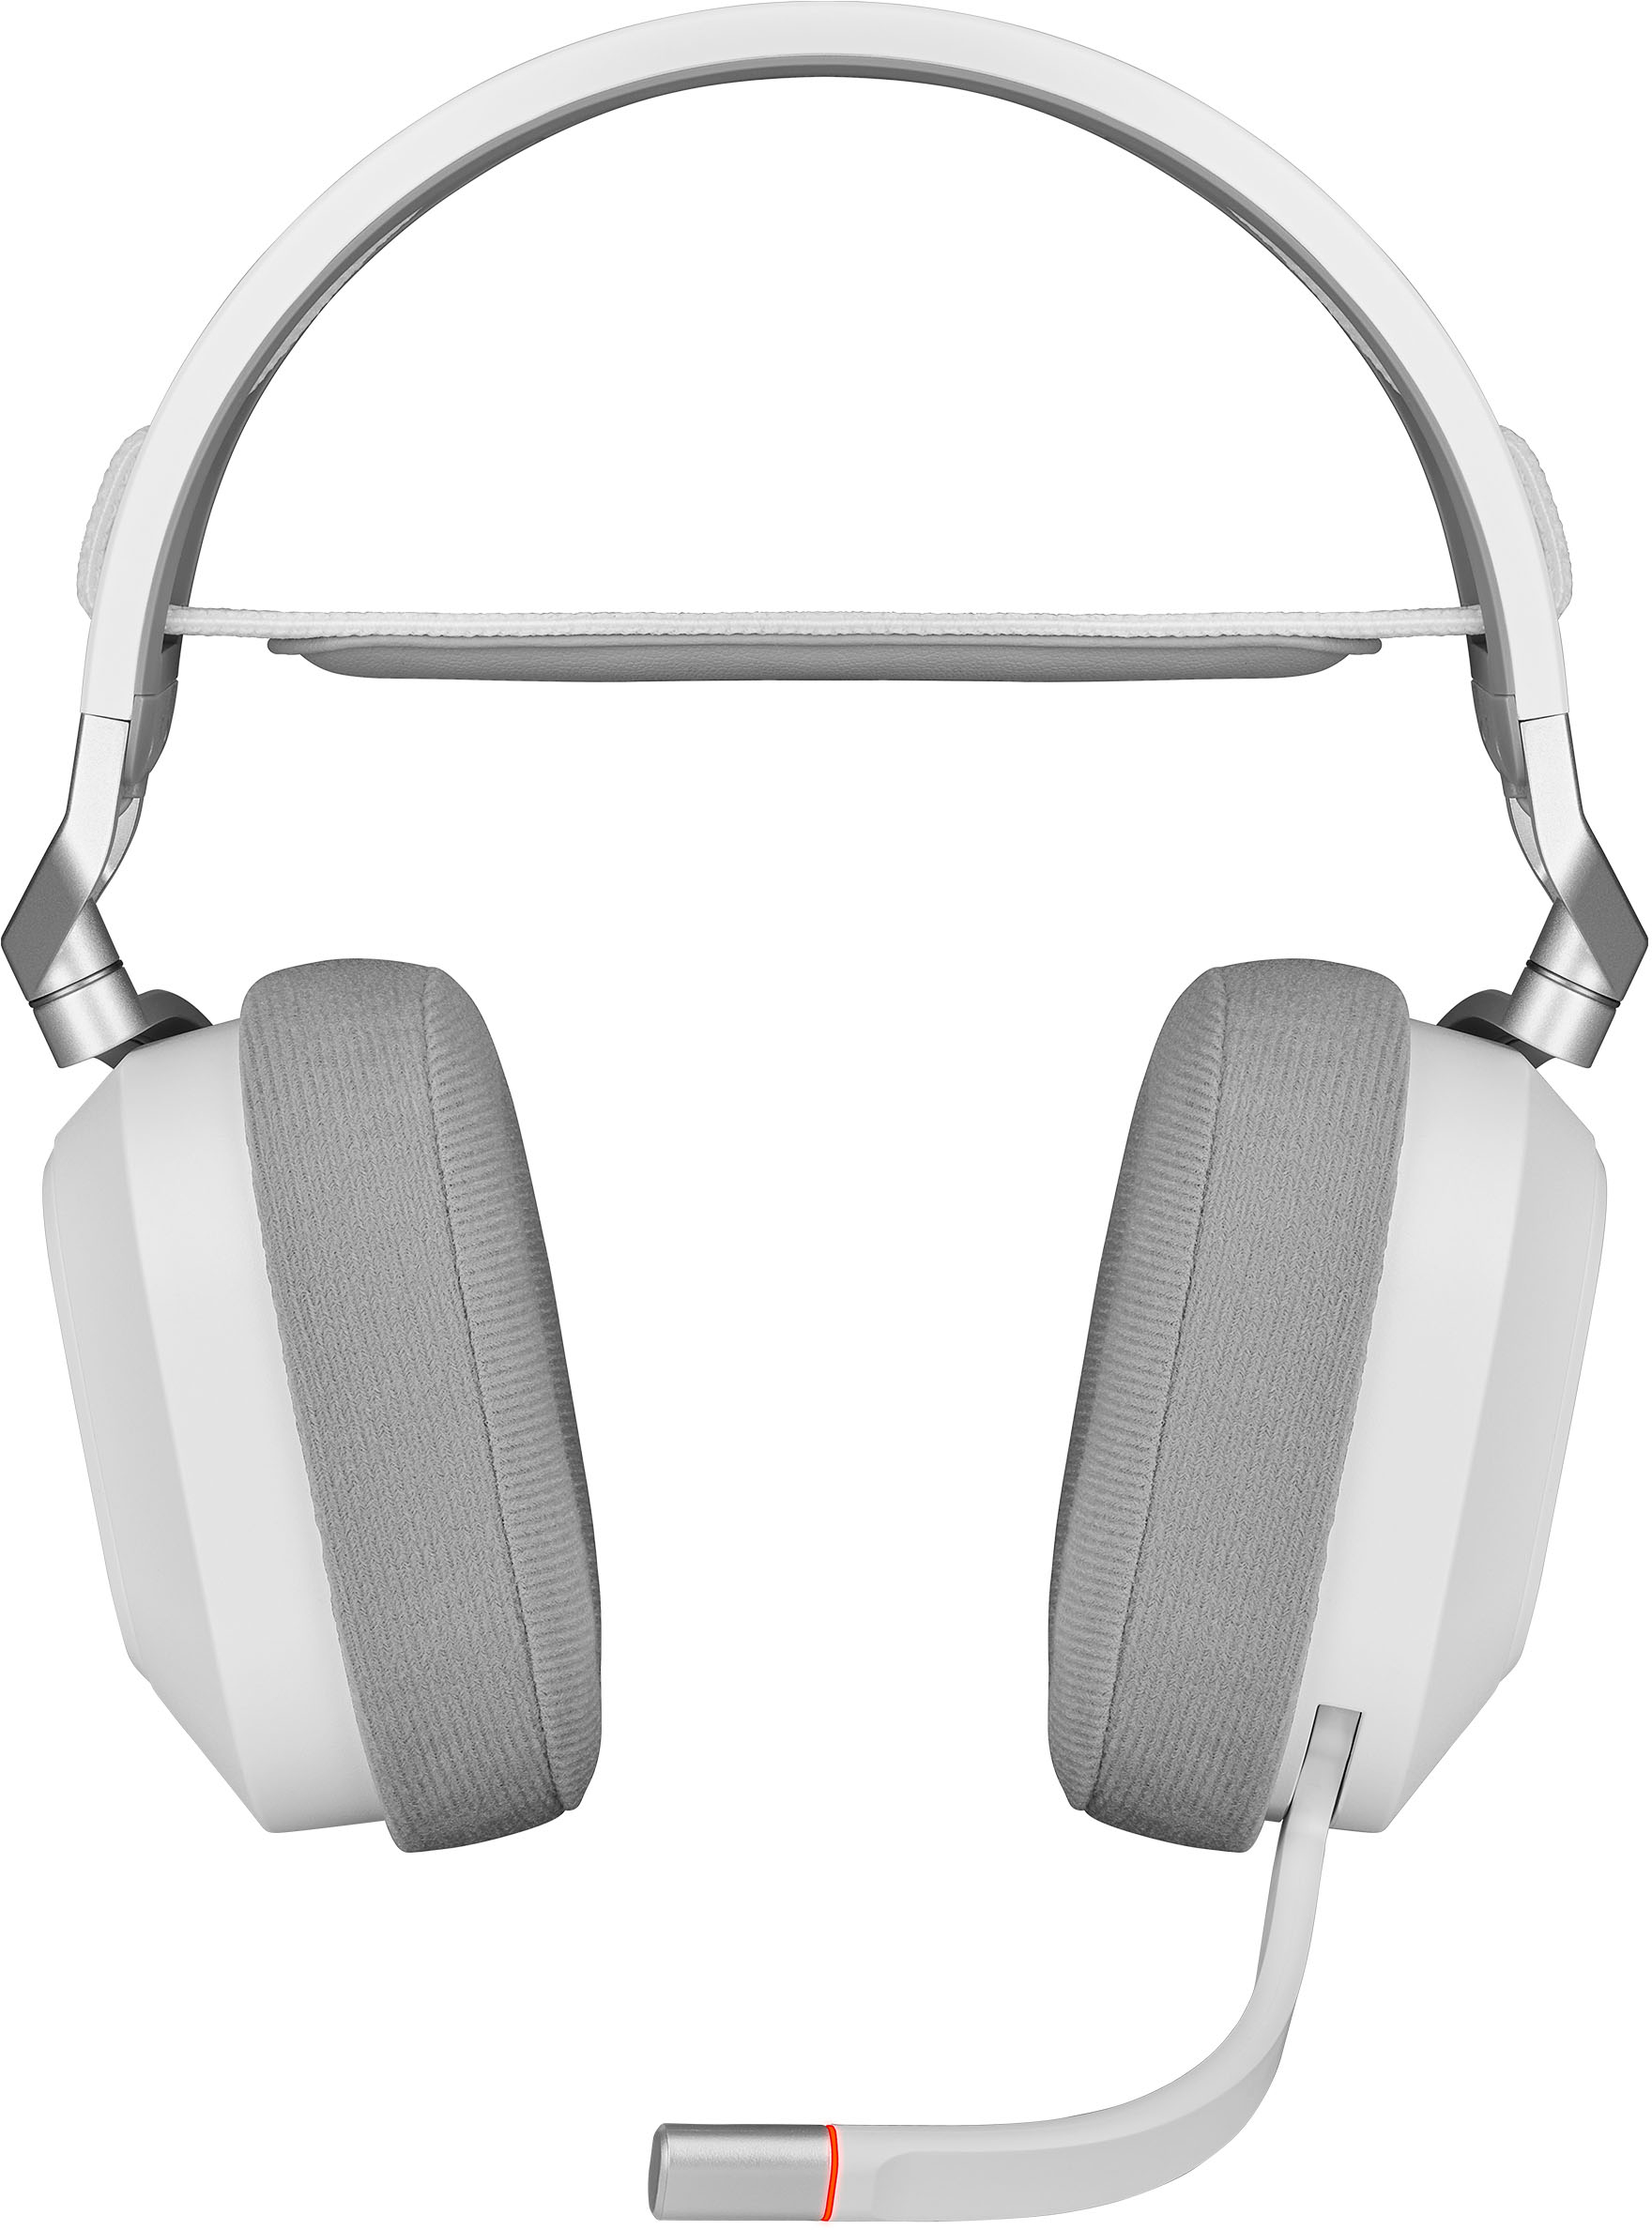 CORSAIR HS80 RGB Wireless PS4 Buy Mac, White Best - Headset PC, CA-9011236-NA Gaming for PS5